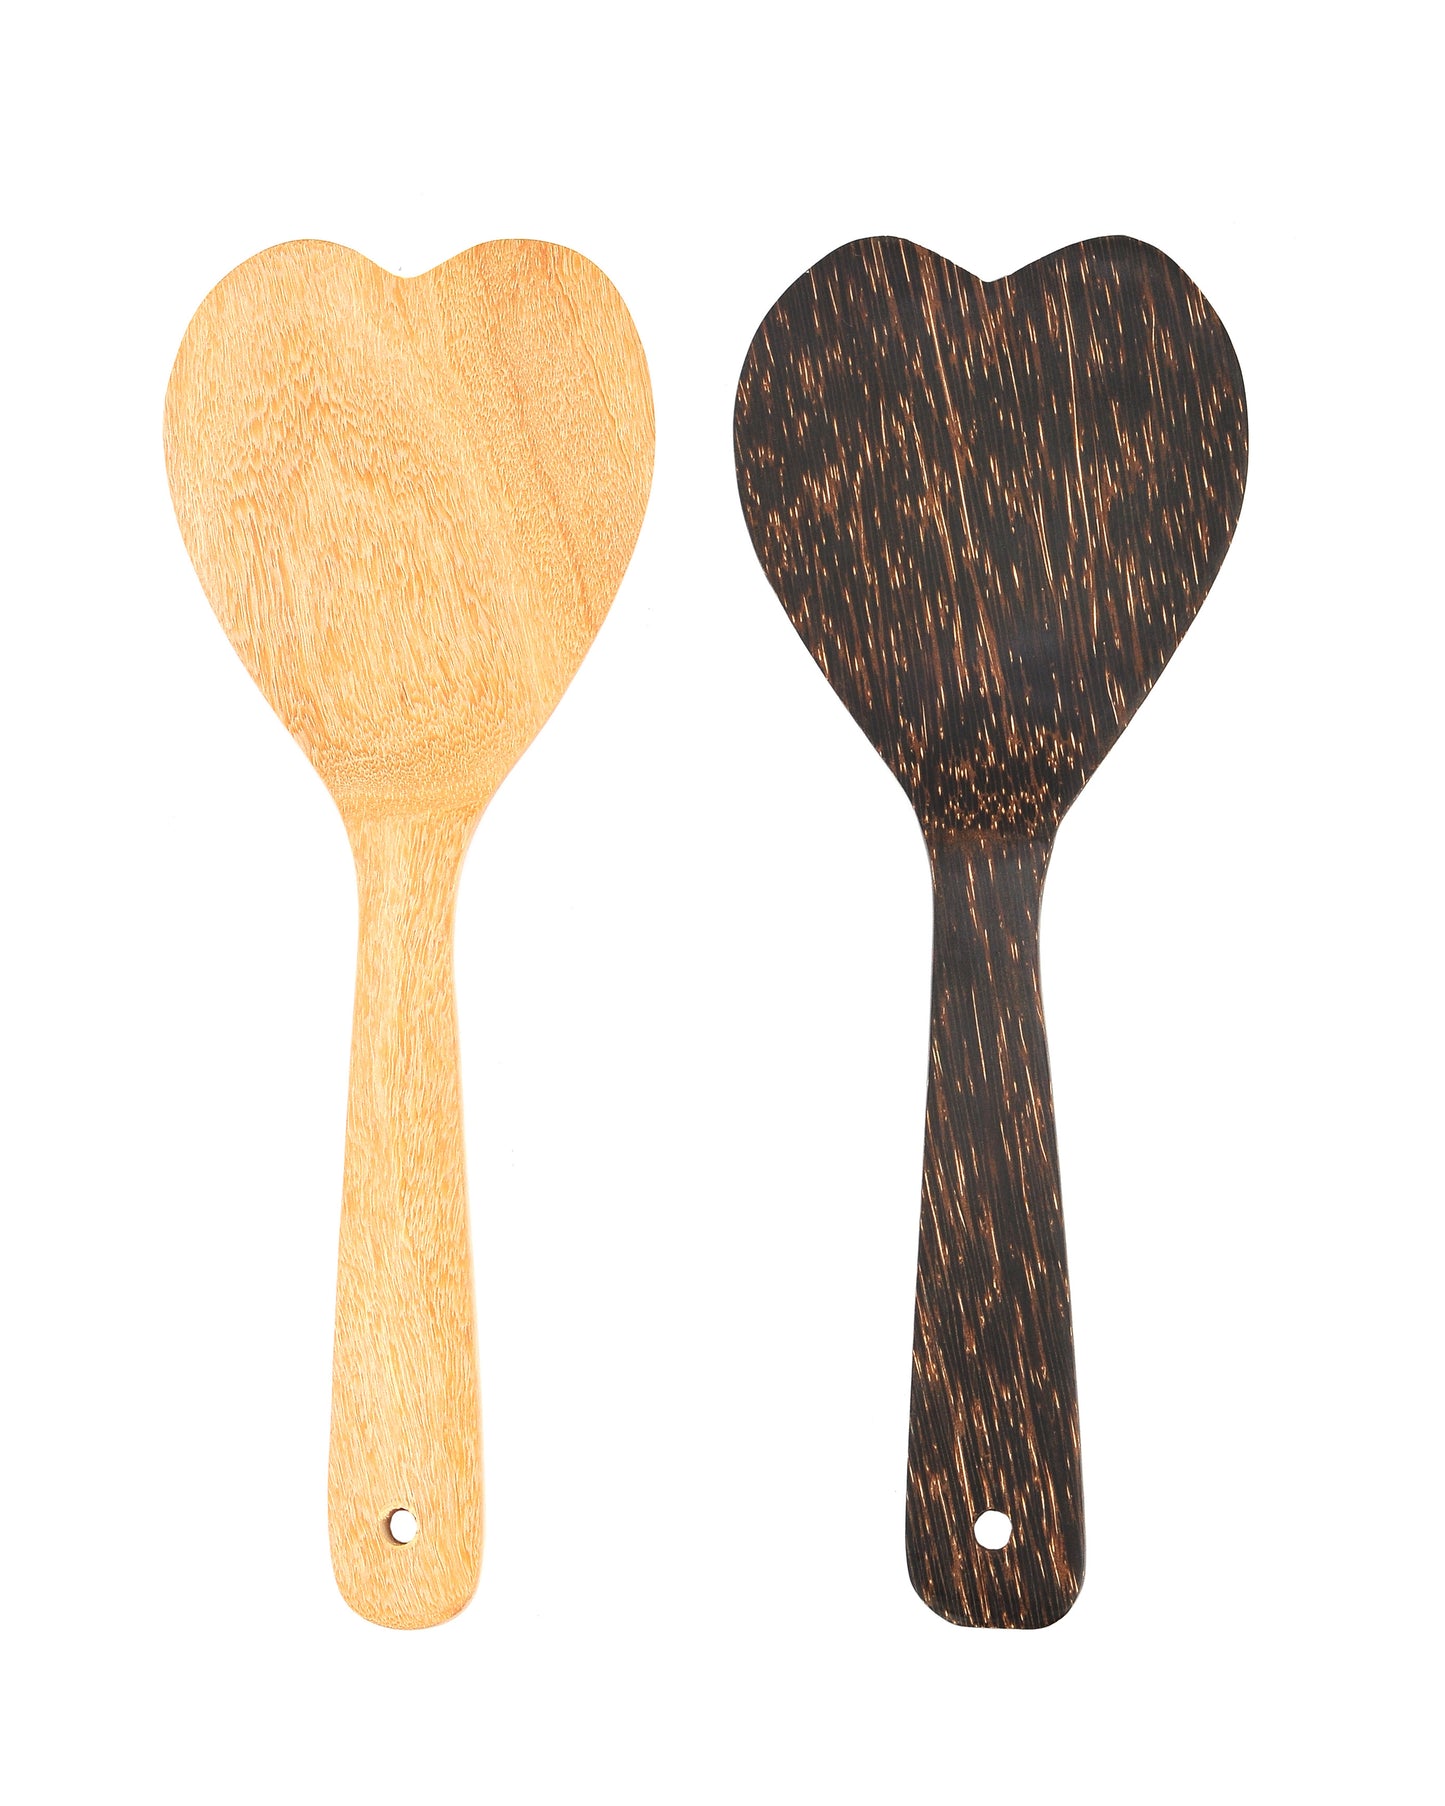 A Handcrafted Coconut Wood Heart-Shape Mini Spatula - Great Addition To Your Kitchen